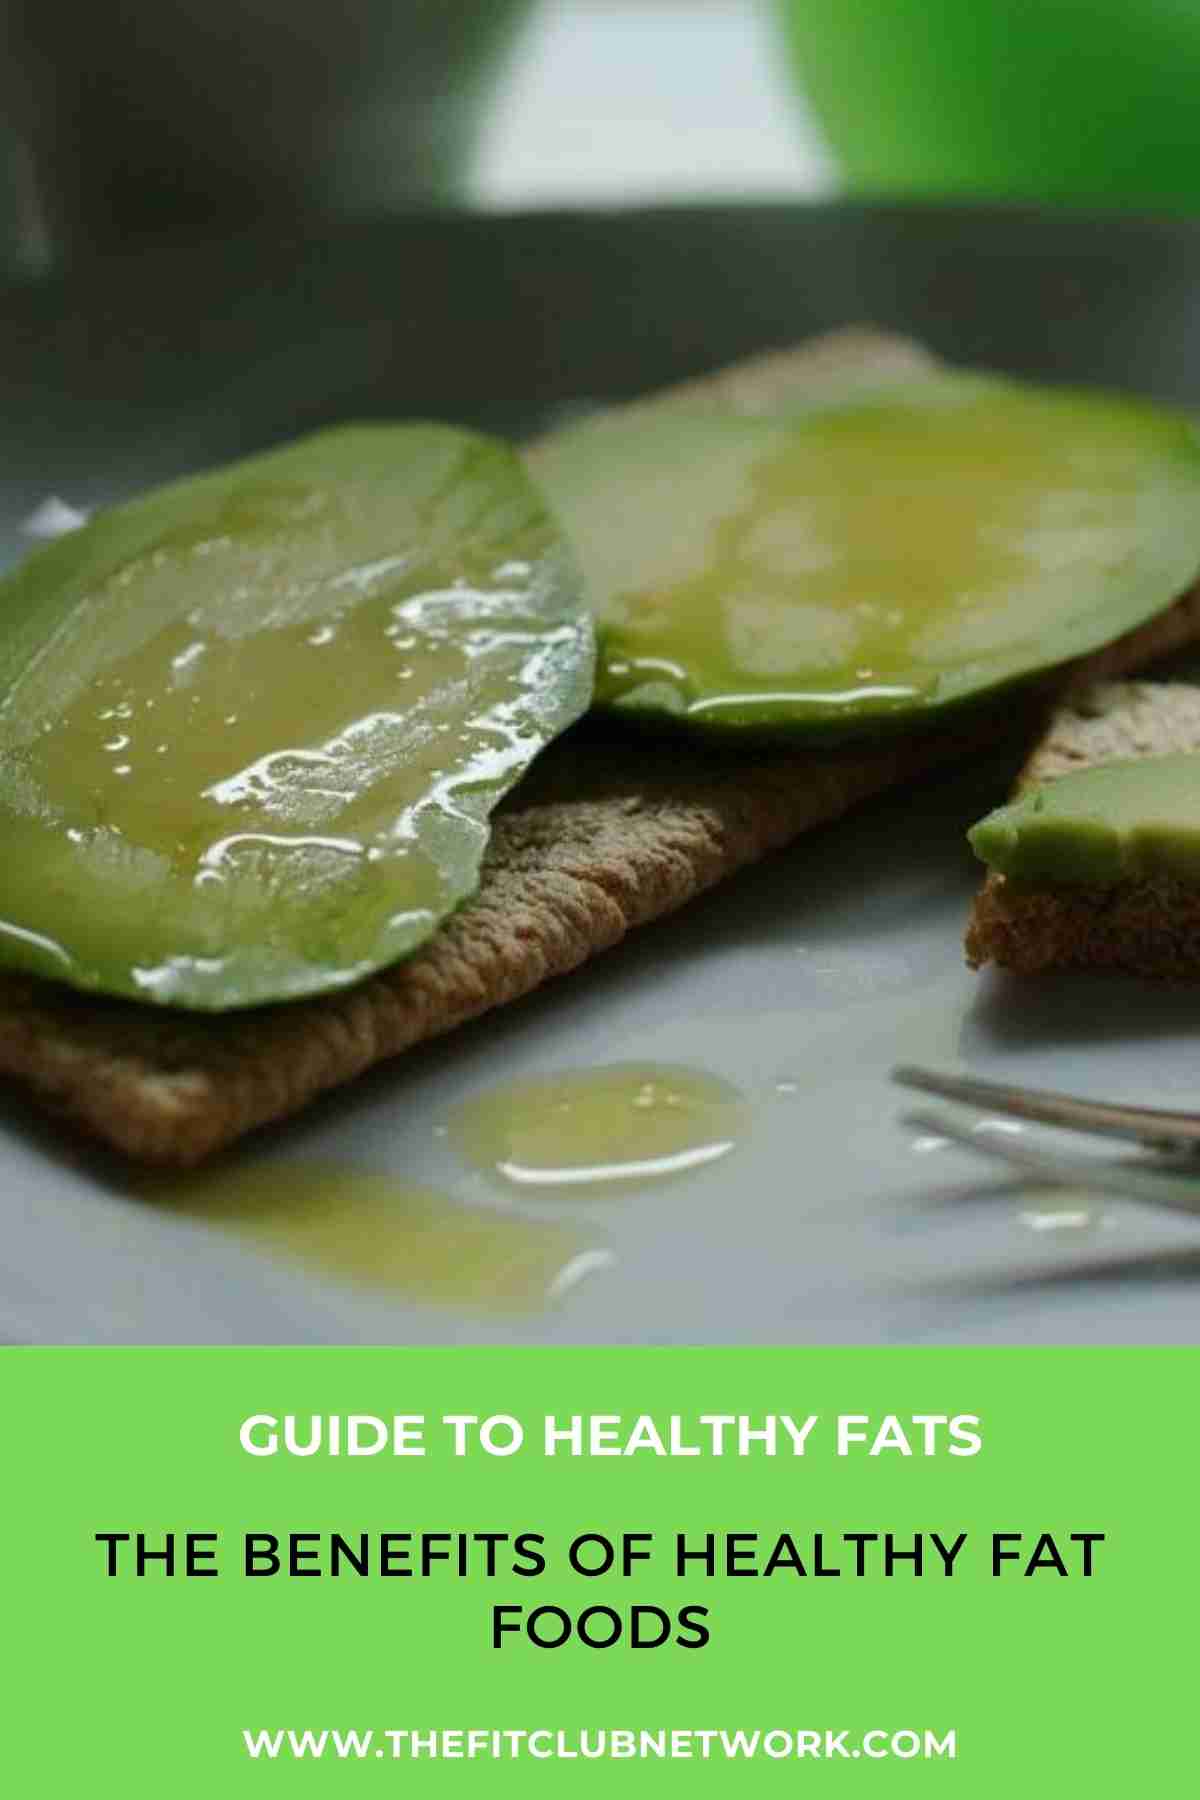 The Benefits of Healthy Fat Foods